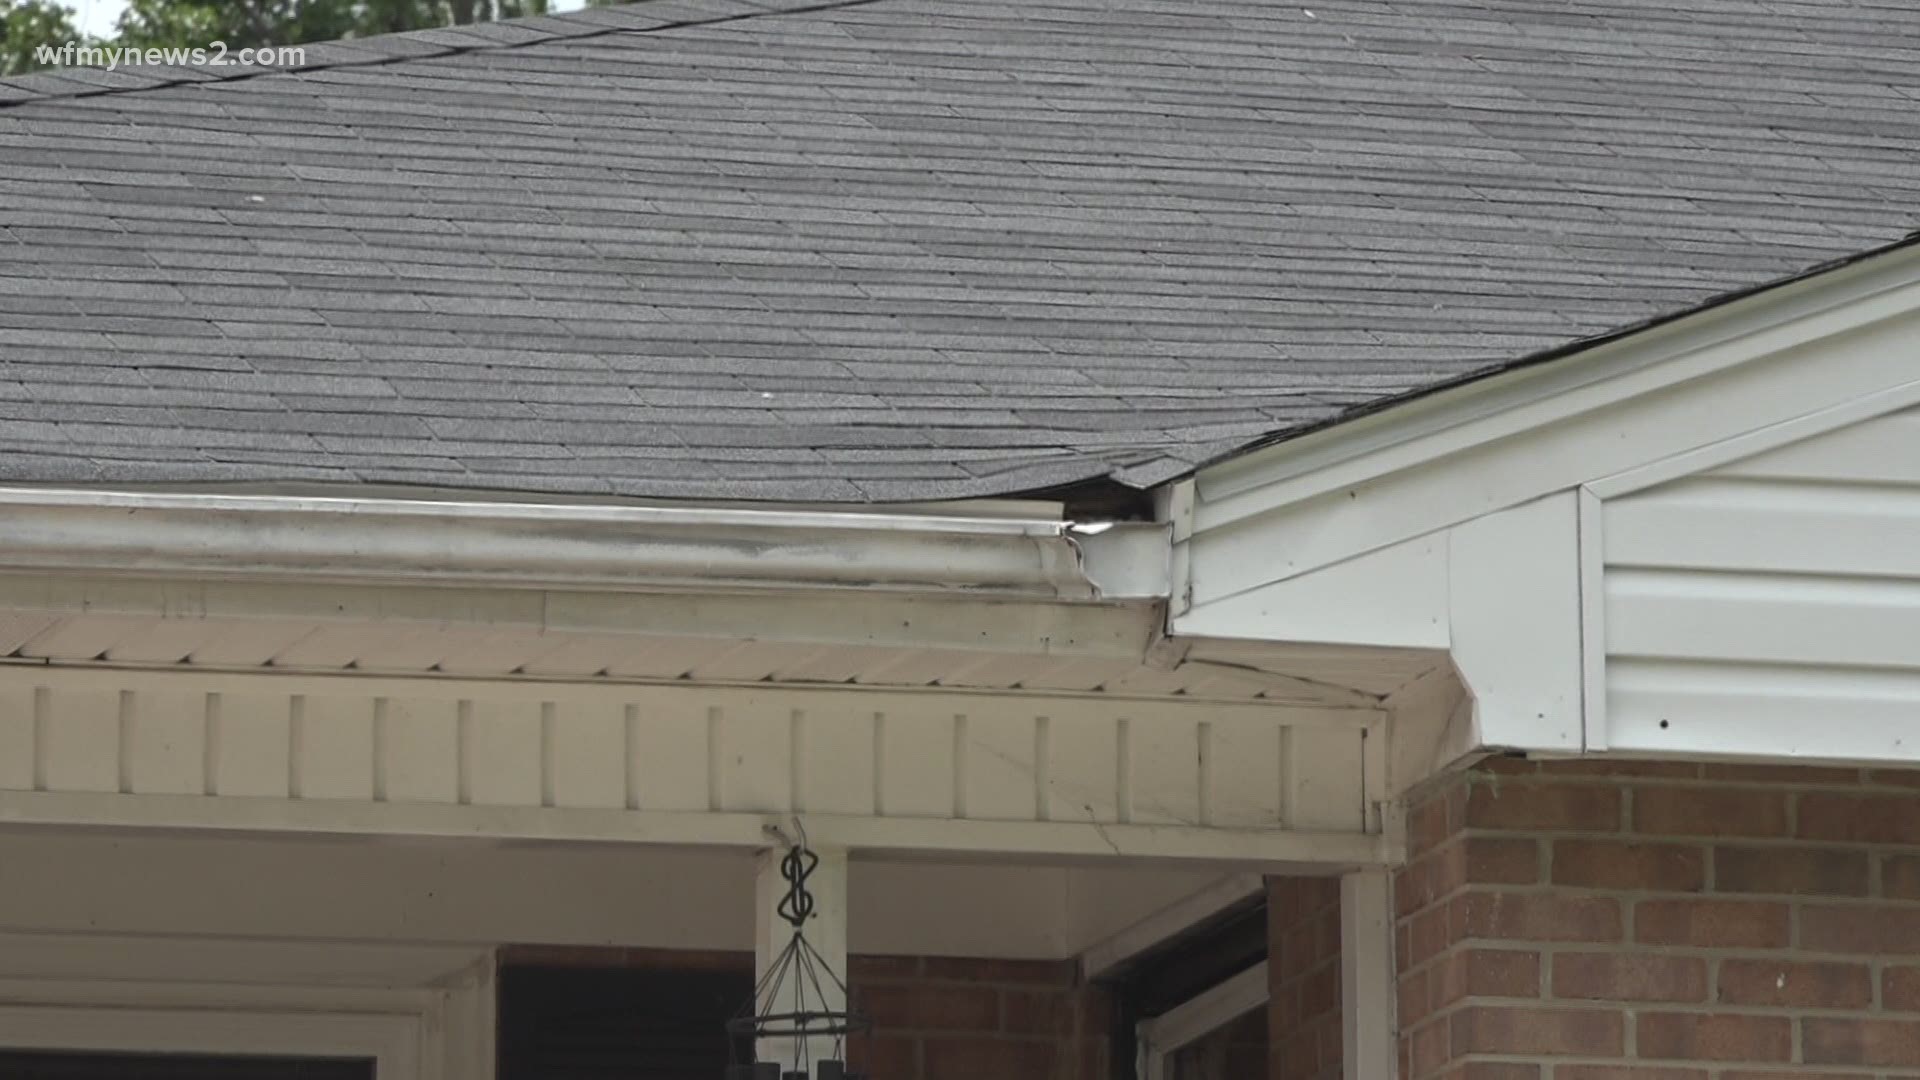 Emma Alston fronted the money to fix her old roof, but when workers didn't show up she called 2 Wants to Know.